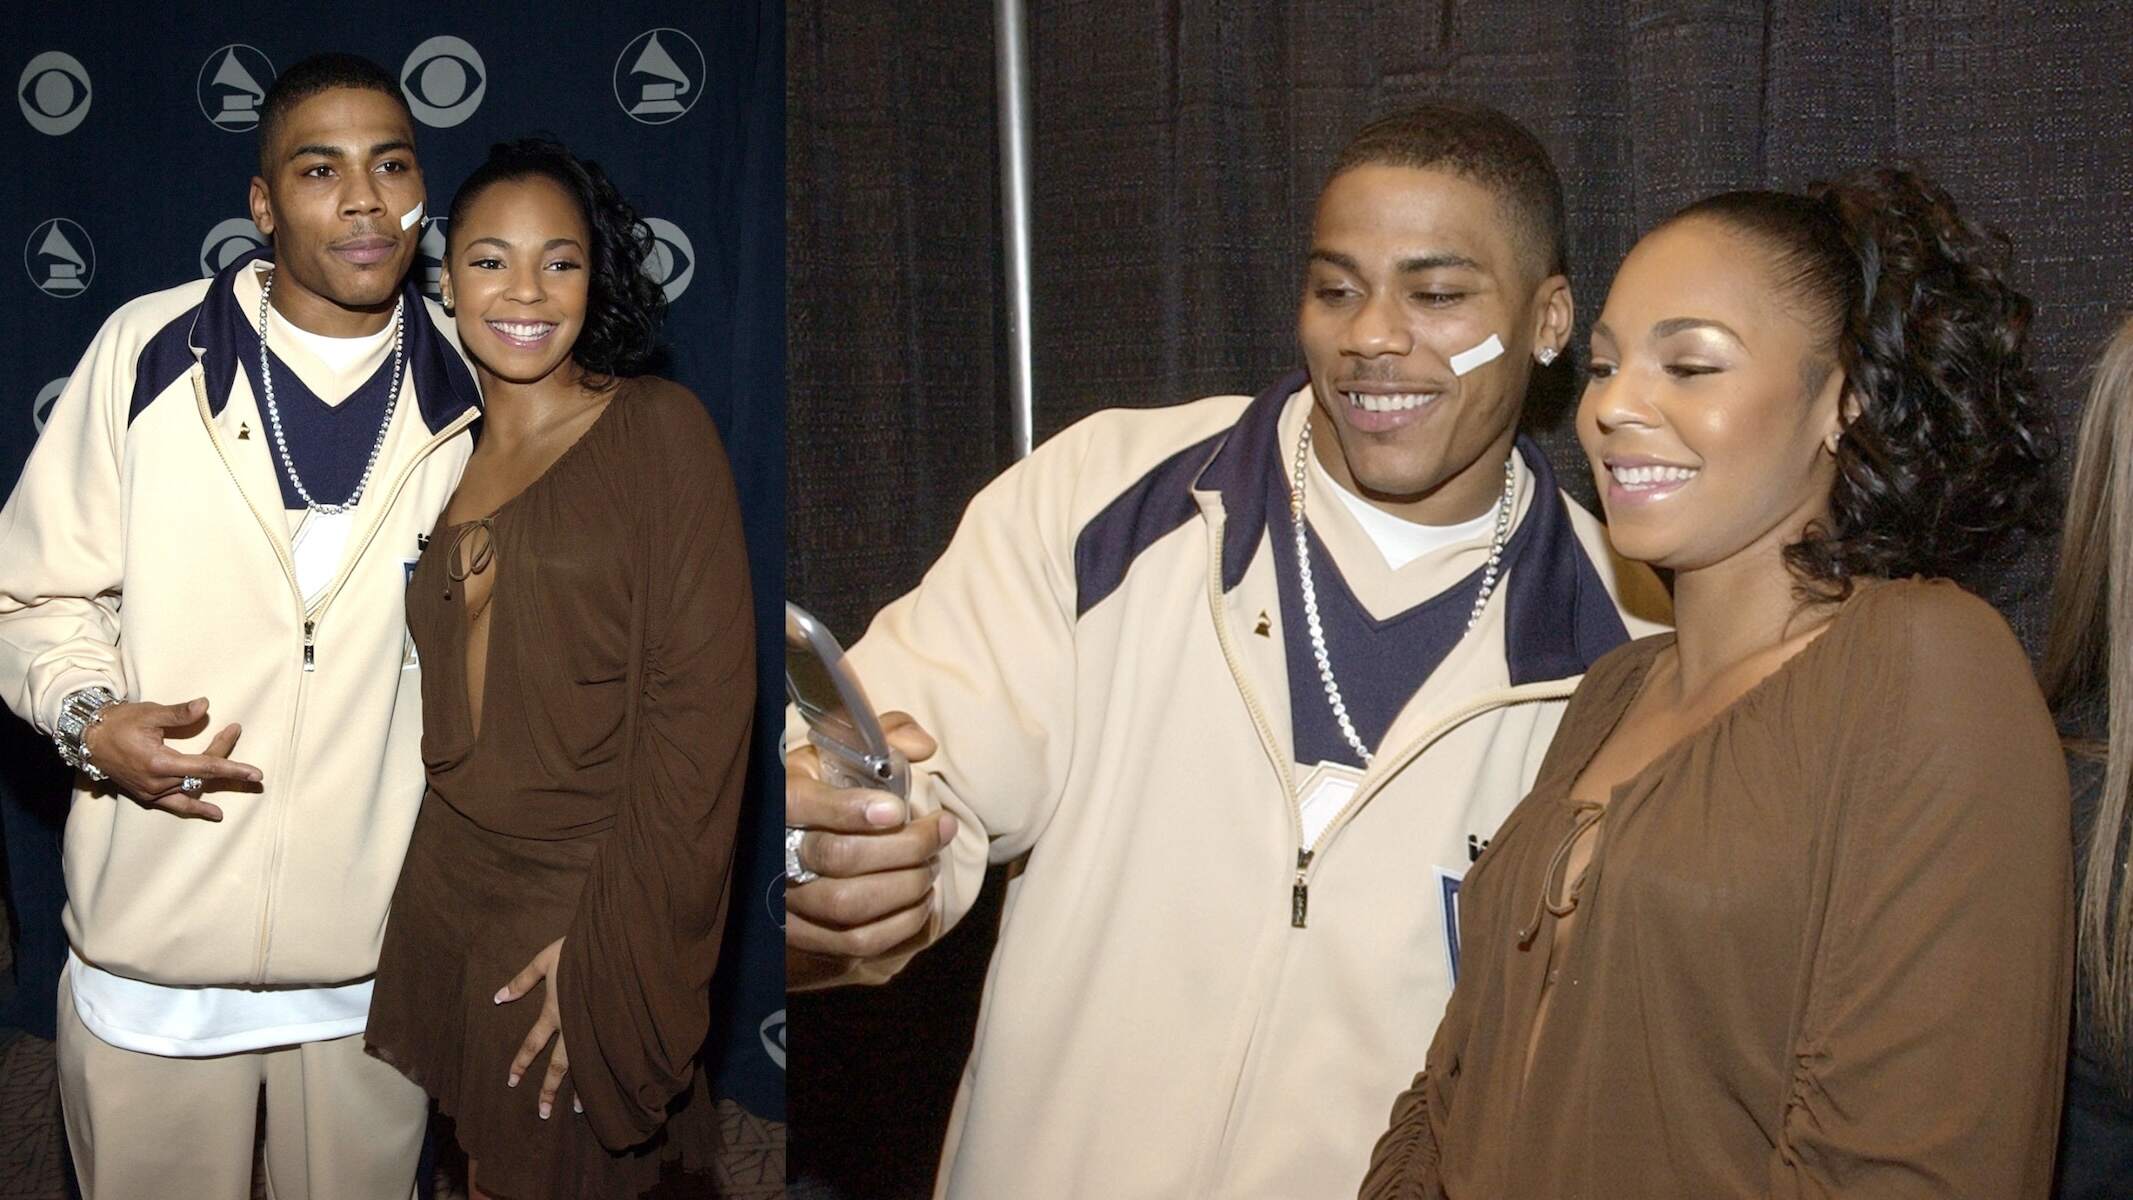 In 2003, Nelly and Ashanti take a photo together at the 2003 Grammy Awards press conference